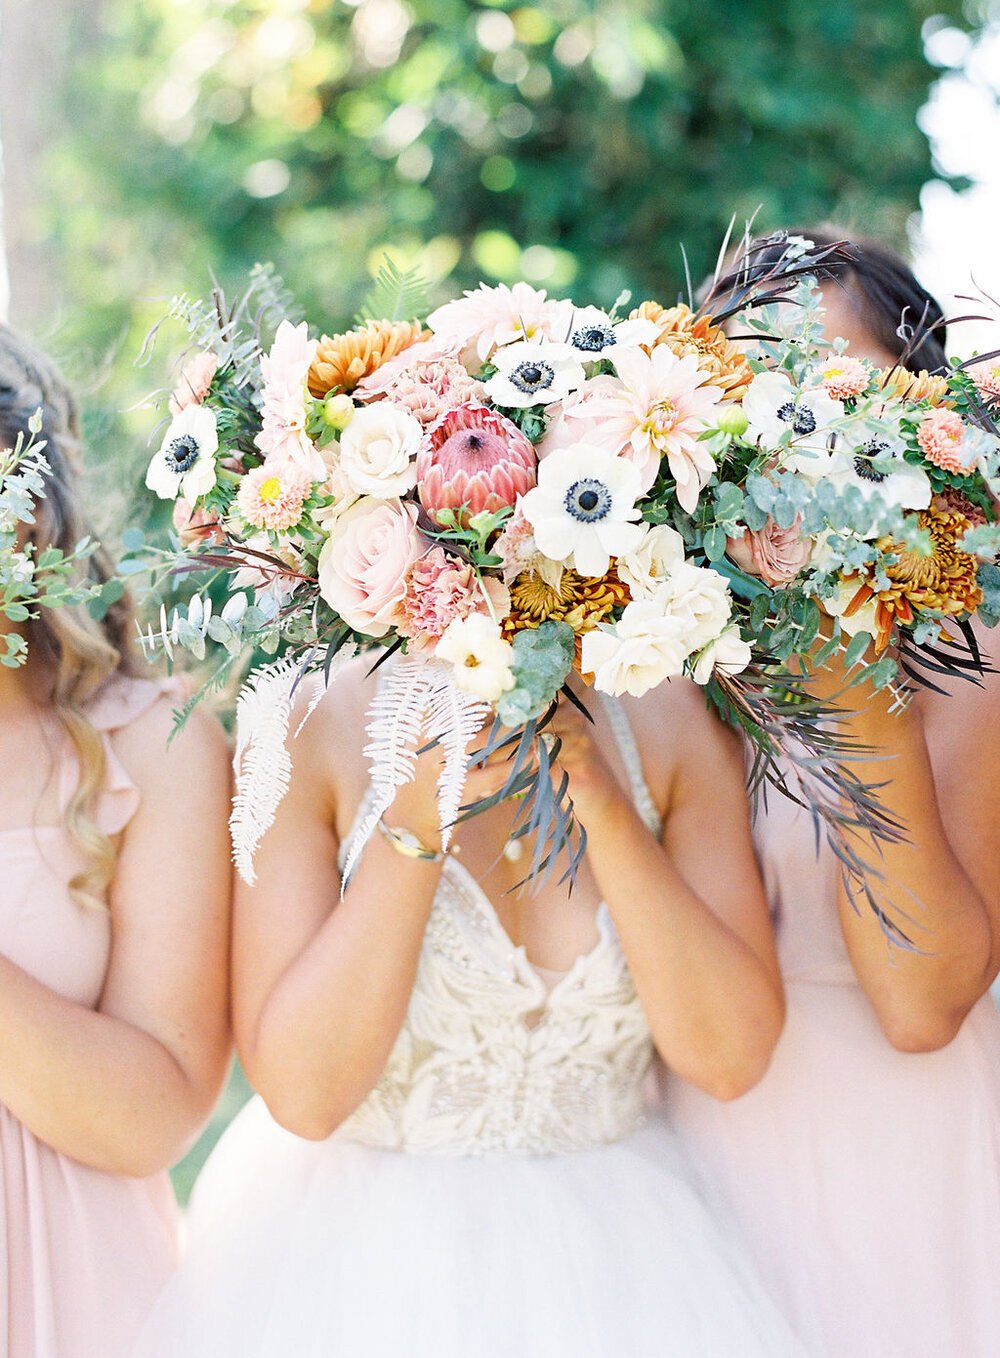 www.santabarbarawedding.com | Danielle Bacon Photography | Twisted Twig | Bride and Bridesmaids Holding Up Bouquets